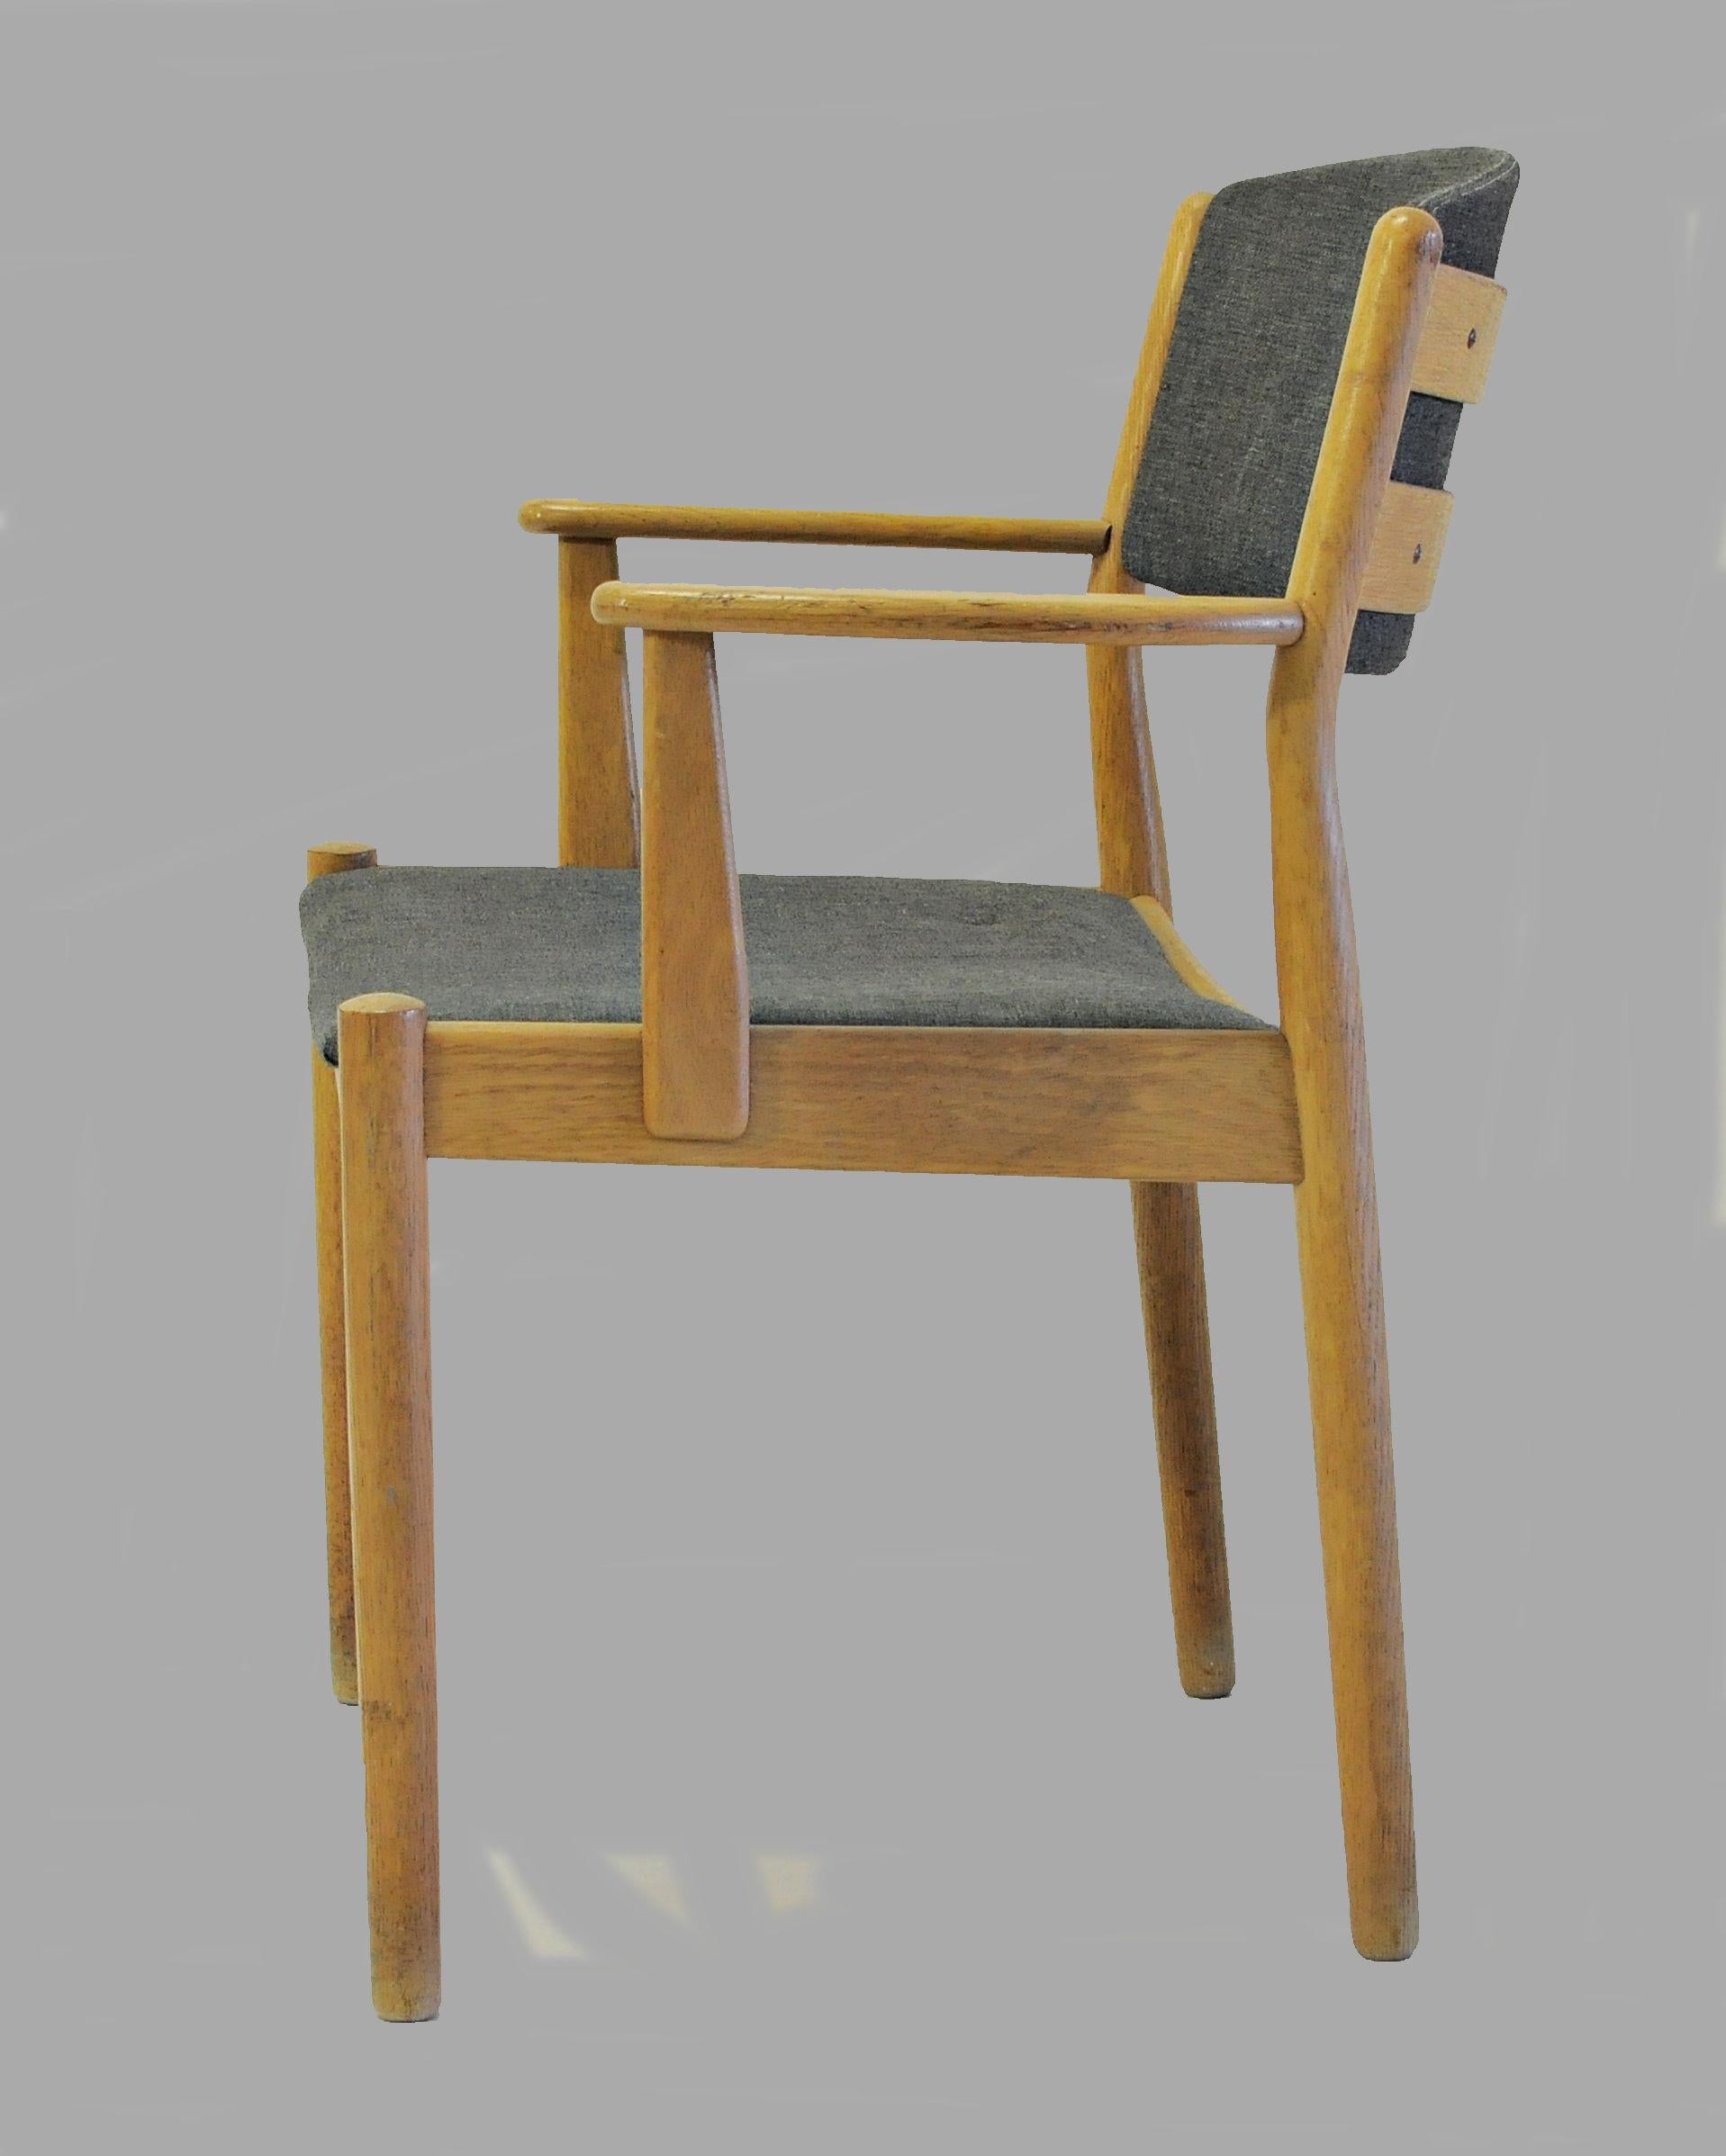 Set of 2 armchairs in oak designed by Poul Volther for FDB Møbler in 1954.

The chairs have been overlooked and refinished by our cabinetmaker to insure that they are in very good condition with only minimal signs of age and use and will be